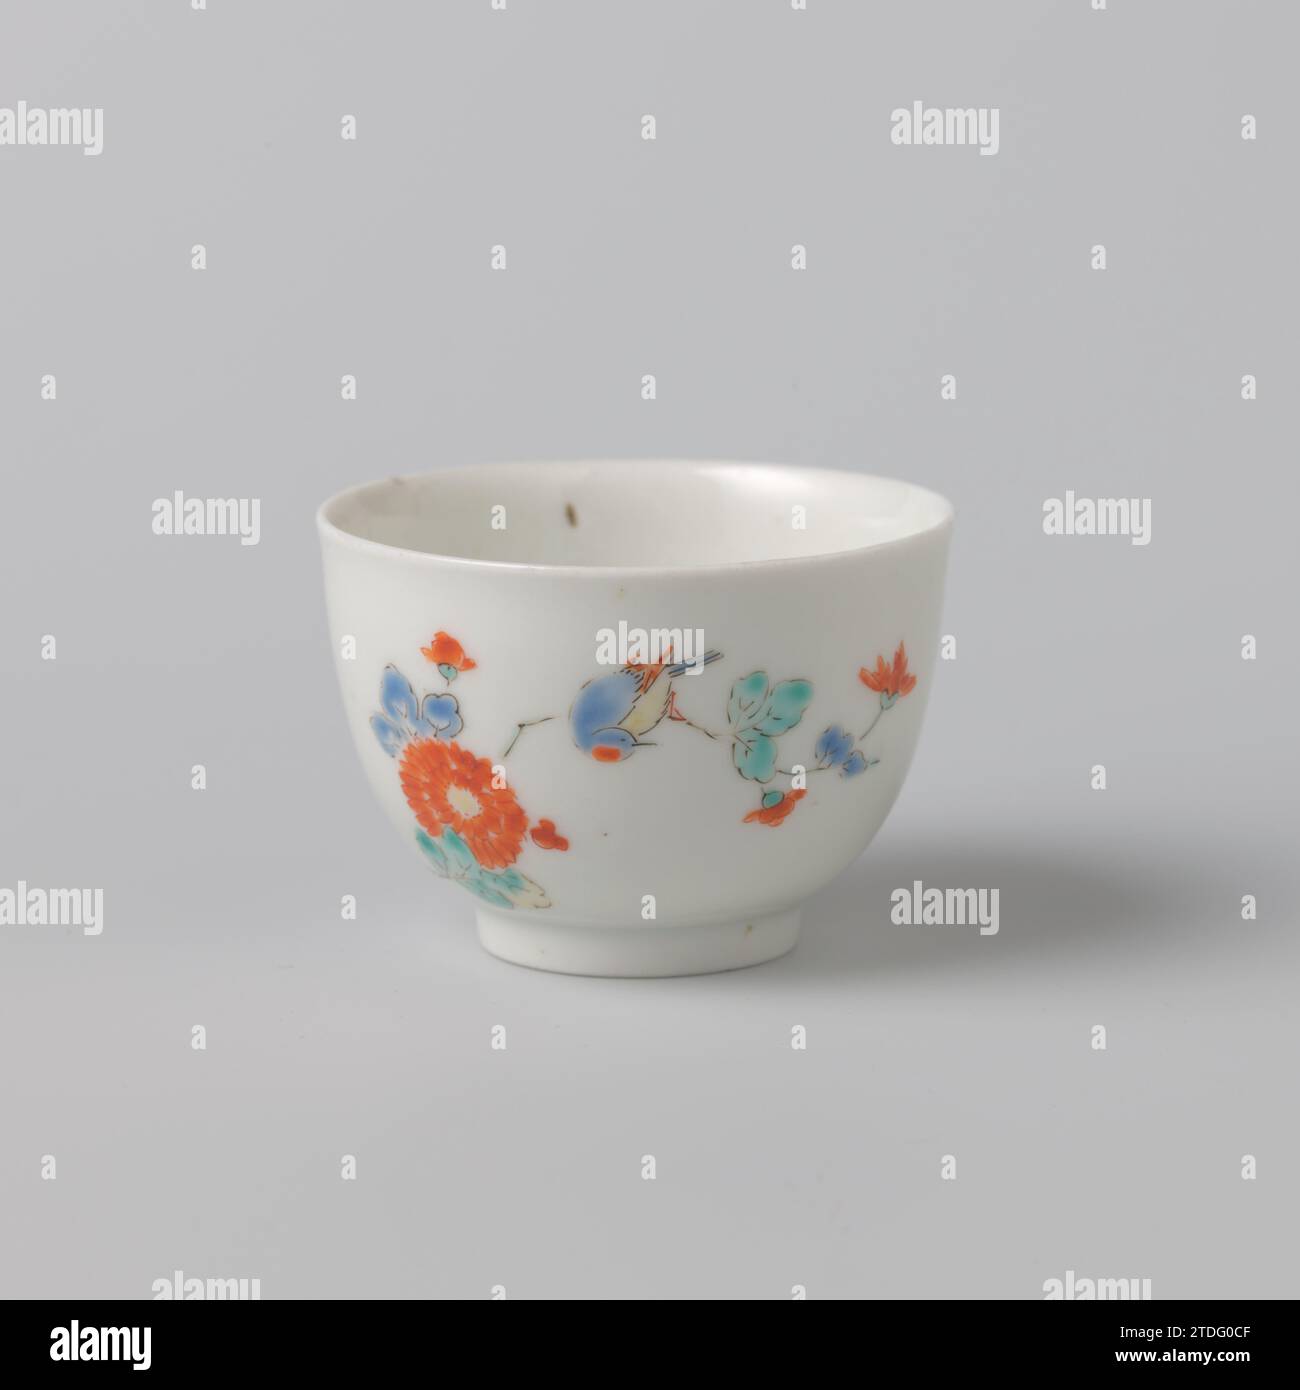 Cup with chrysanthemum and birds, anonymous, c. 1670 - c. 1700 Round head of porcelain, painted on the glaze in blue, red, green, yellow and black, with two chrysanthemum branches and two birds, one in the air. Kakiemon style. Japan porcelain. glaze. painting / vitrification Round head of porcelain, painted on the glaze in blue, red, green, yellow and black, with two chrysanthemum branches and two birds, one in the air. Kakiemon style. Japan porcelain. glaze. painting / vitrification Stock Photo